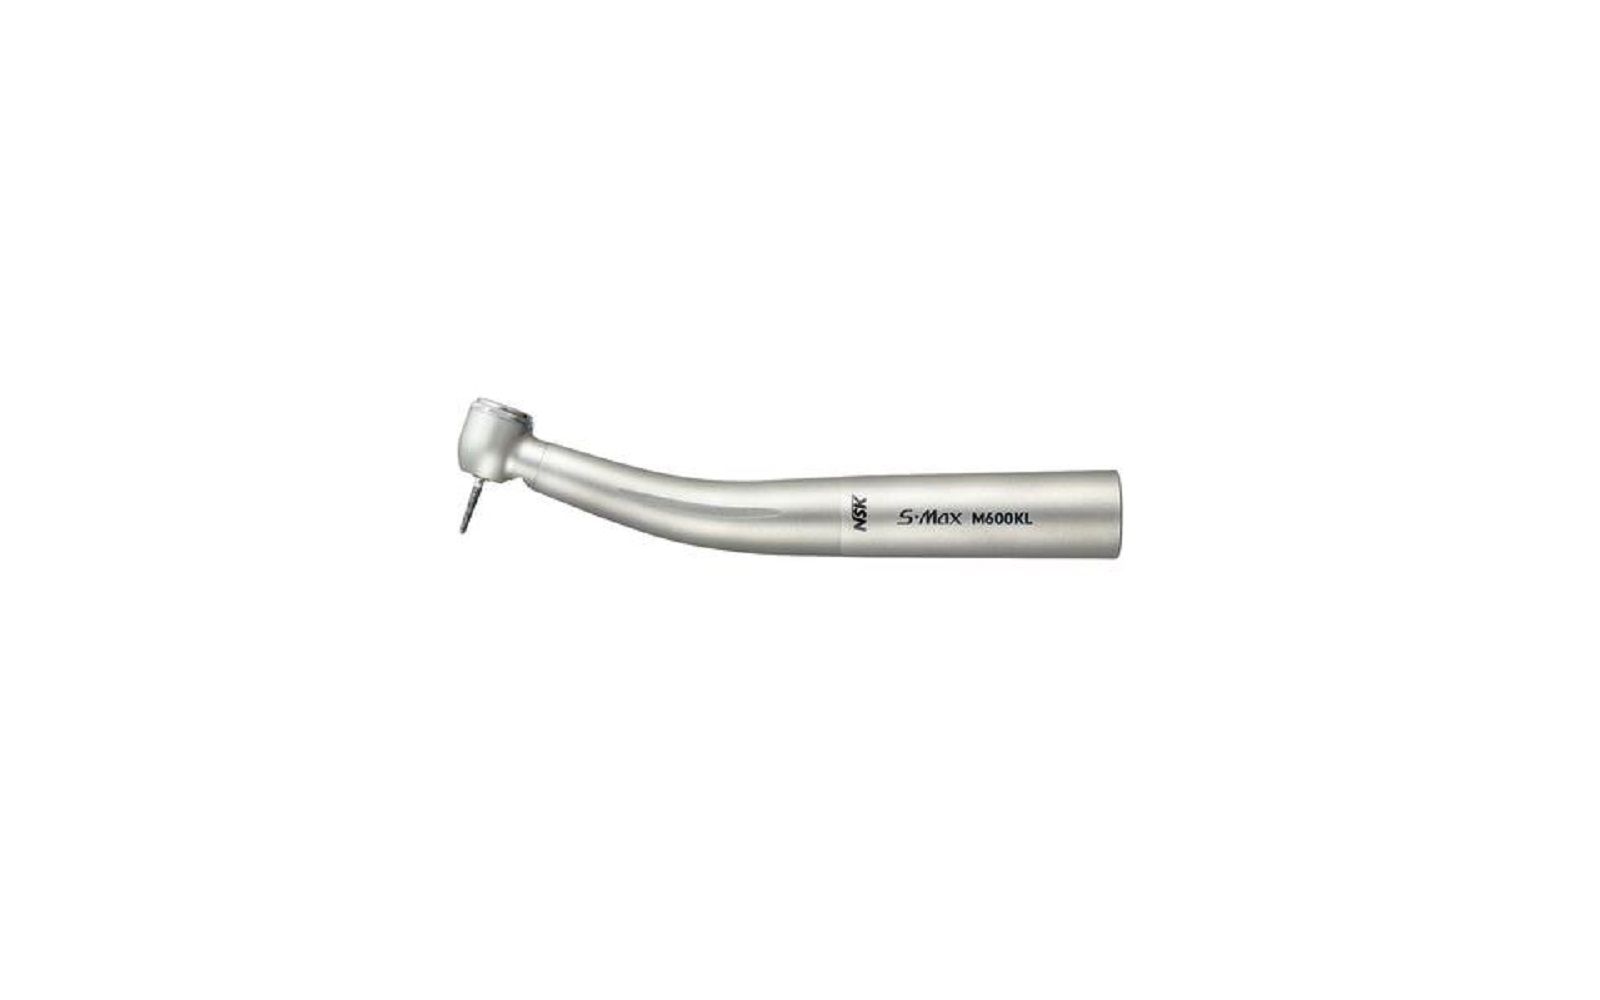 S-max m series high speed air handpieces – contra angle, push button autochuck, quadruple spray